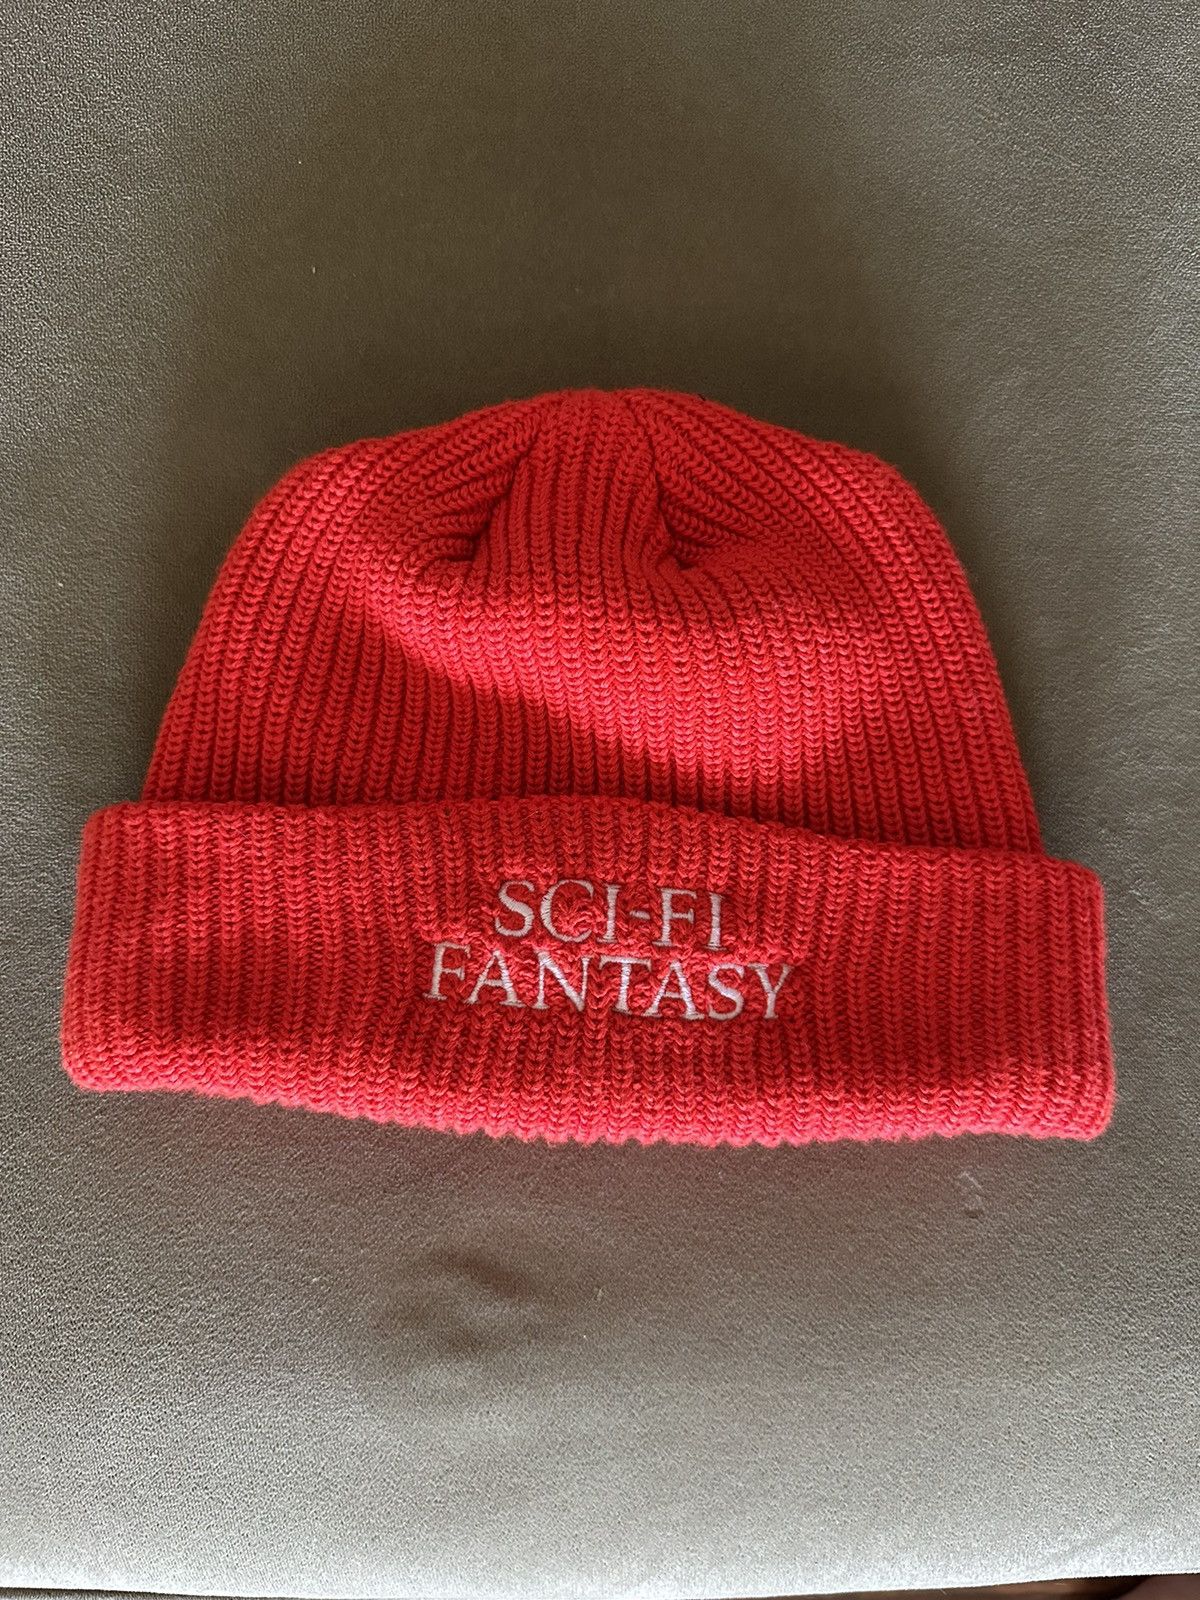 Sci-Fi Fantasy SCI-FI FANTASY RED BEANIE Size ONE SIZE - 1 Preview